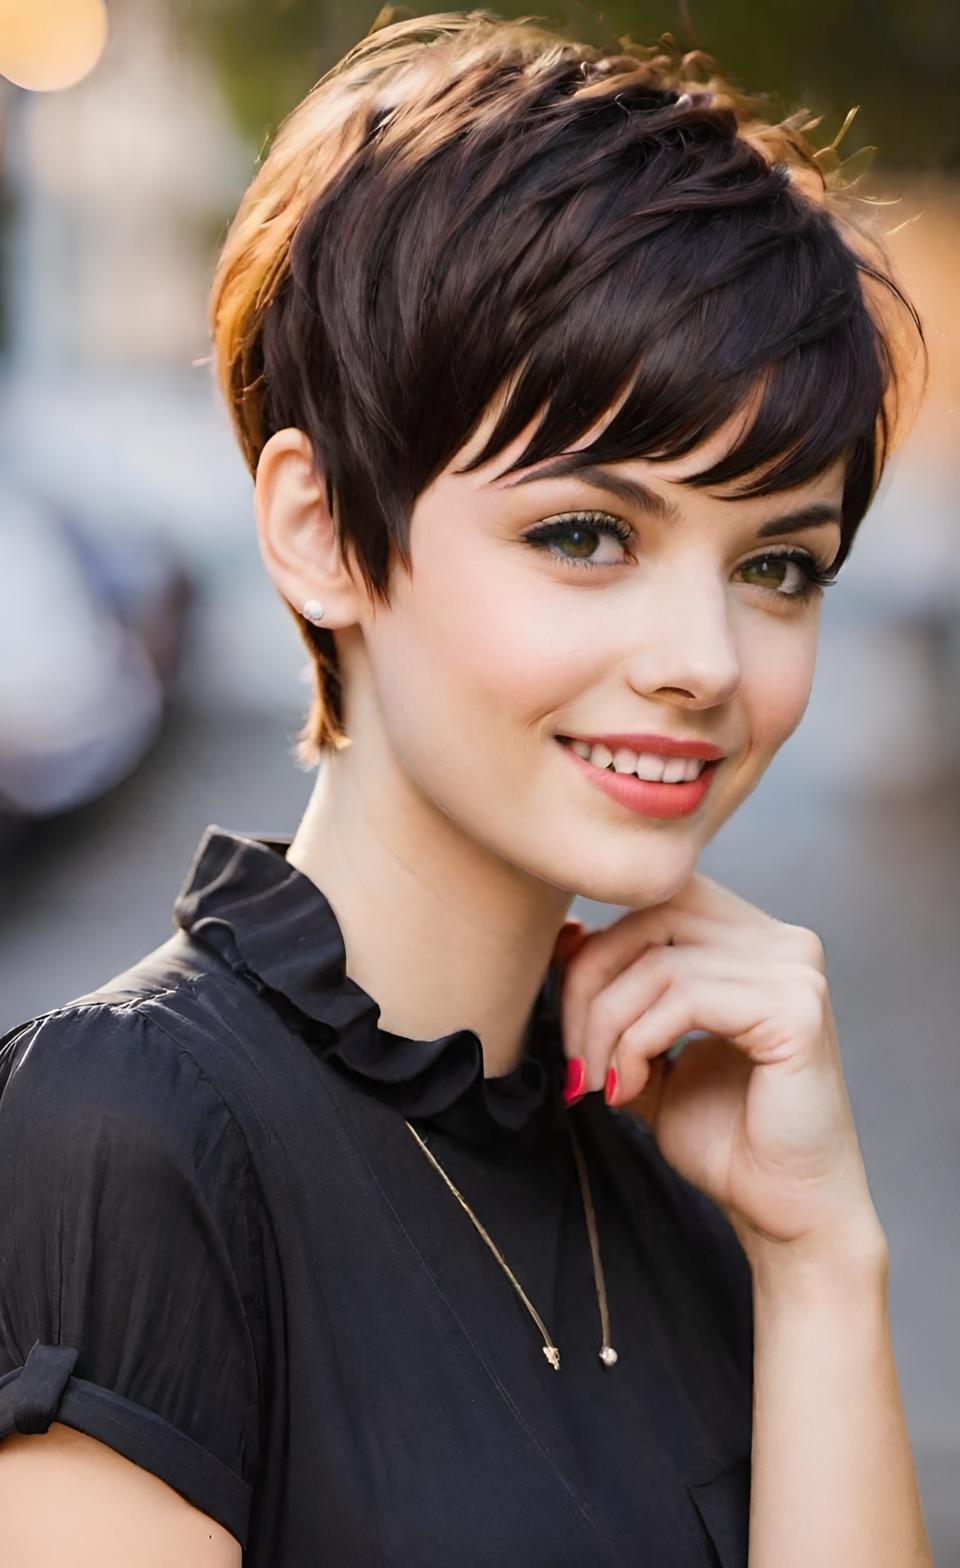 44 Best Pixie Cut Hairstyles with Bangs